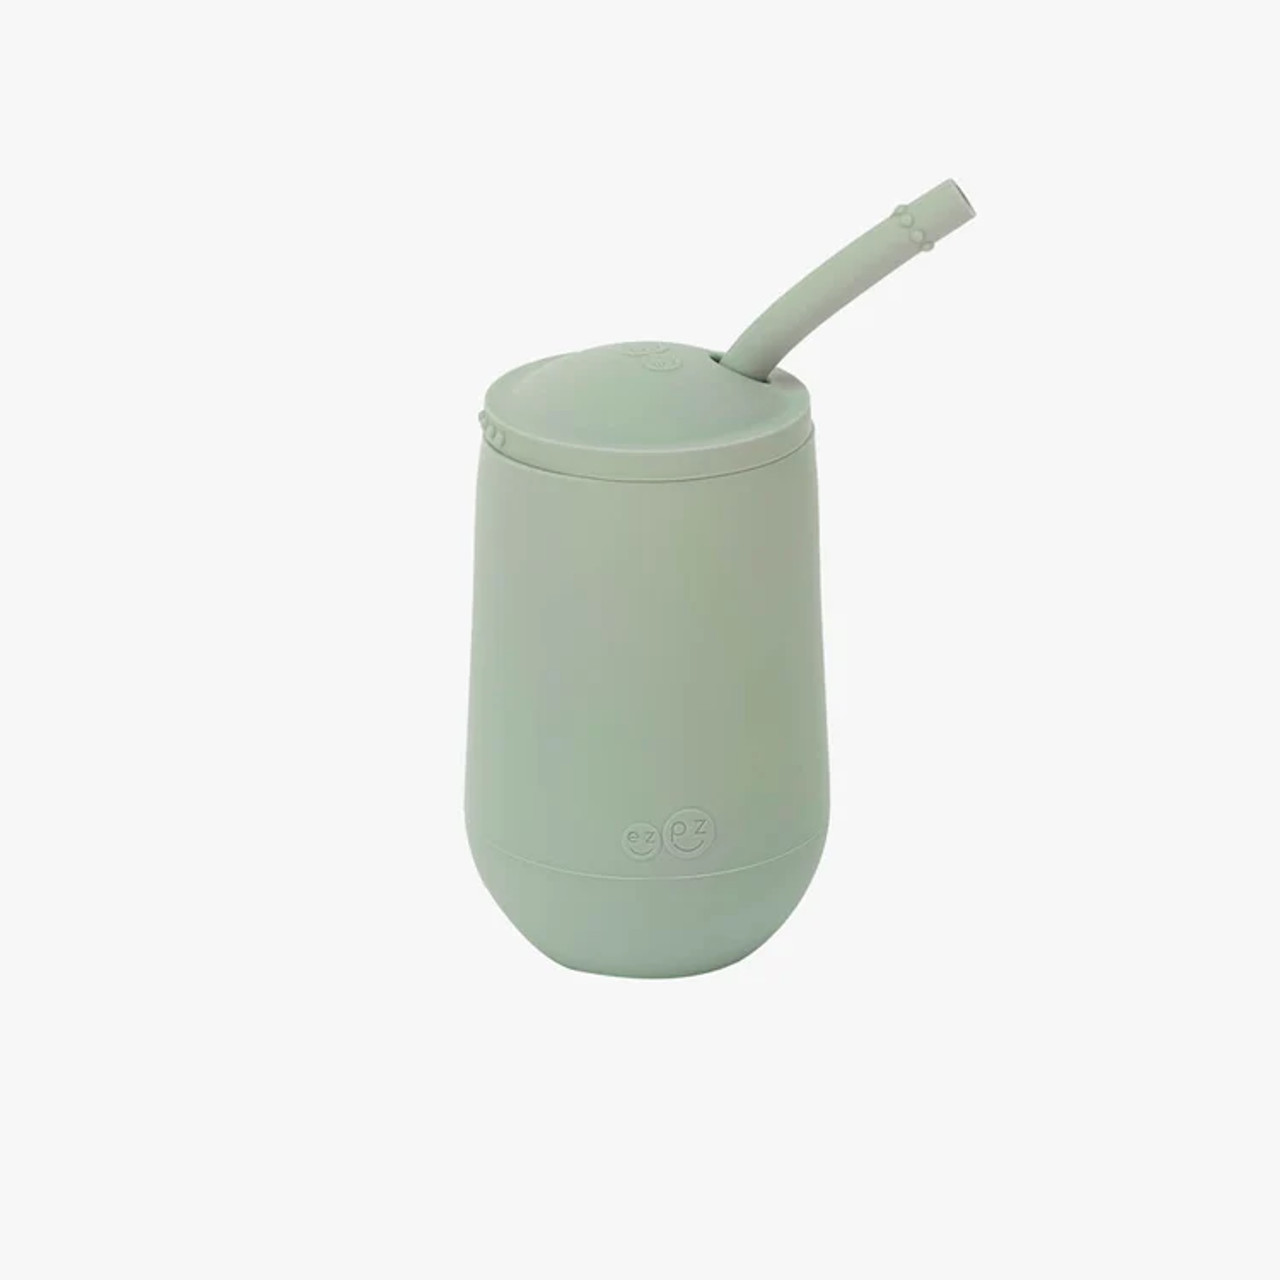 Lollacup Straw Sippy Cup - Brave Blue